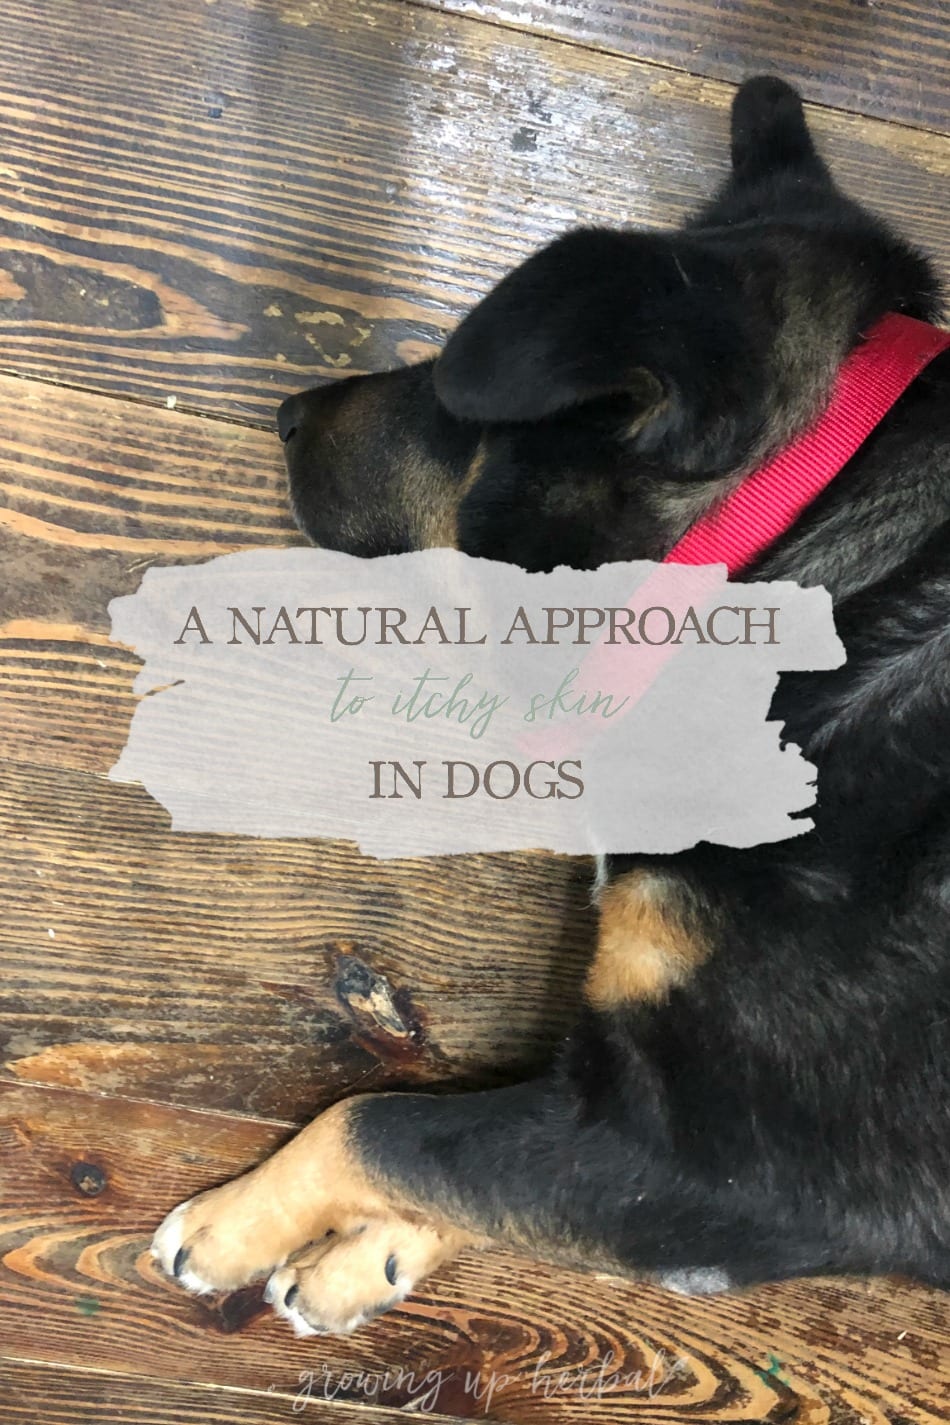 A Natural Approach to Itchy Skin in Dogs | Growing Up Herbal | Do you have a dog who suffers from itchy skin? Here's how to use herbs and essential oils for support and relief from itchy skin in dogs.